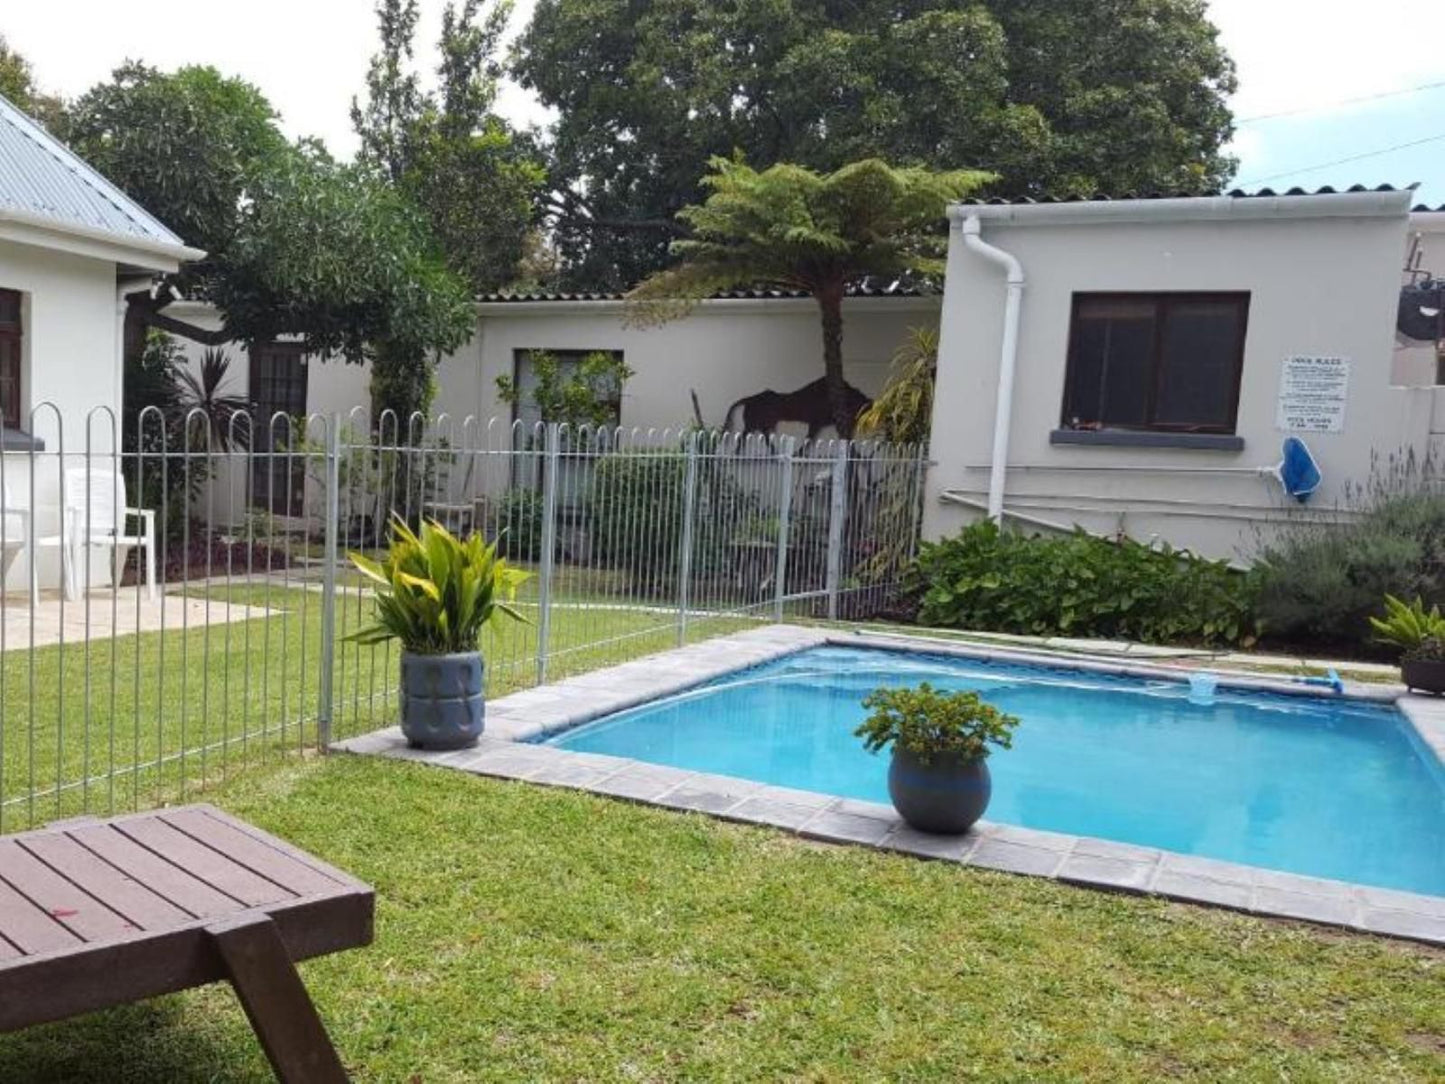 39 On Nile Guesthouse Perridgevale Port Elizabeth Eastern Cape South Africa House, Building, Architecture, Palm Tree, Plant, Nature, Wood, Garden, Swimming Pool